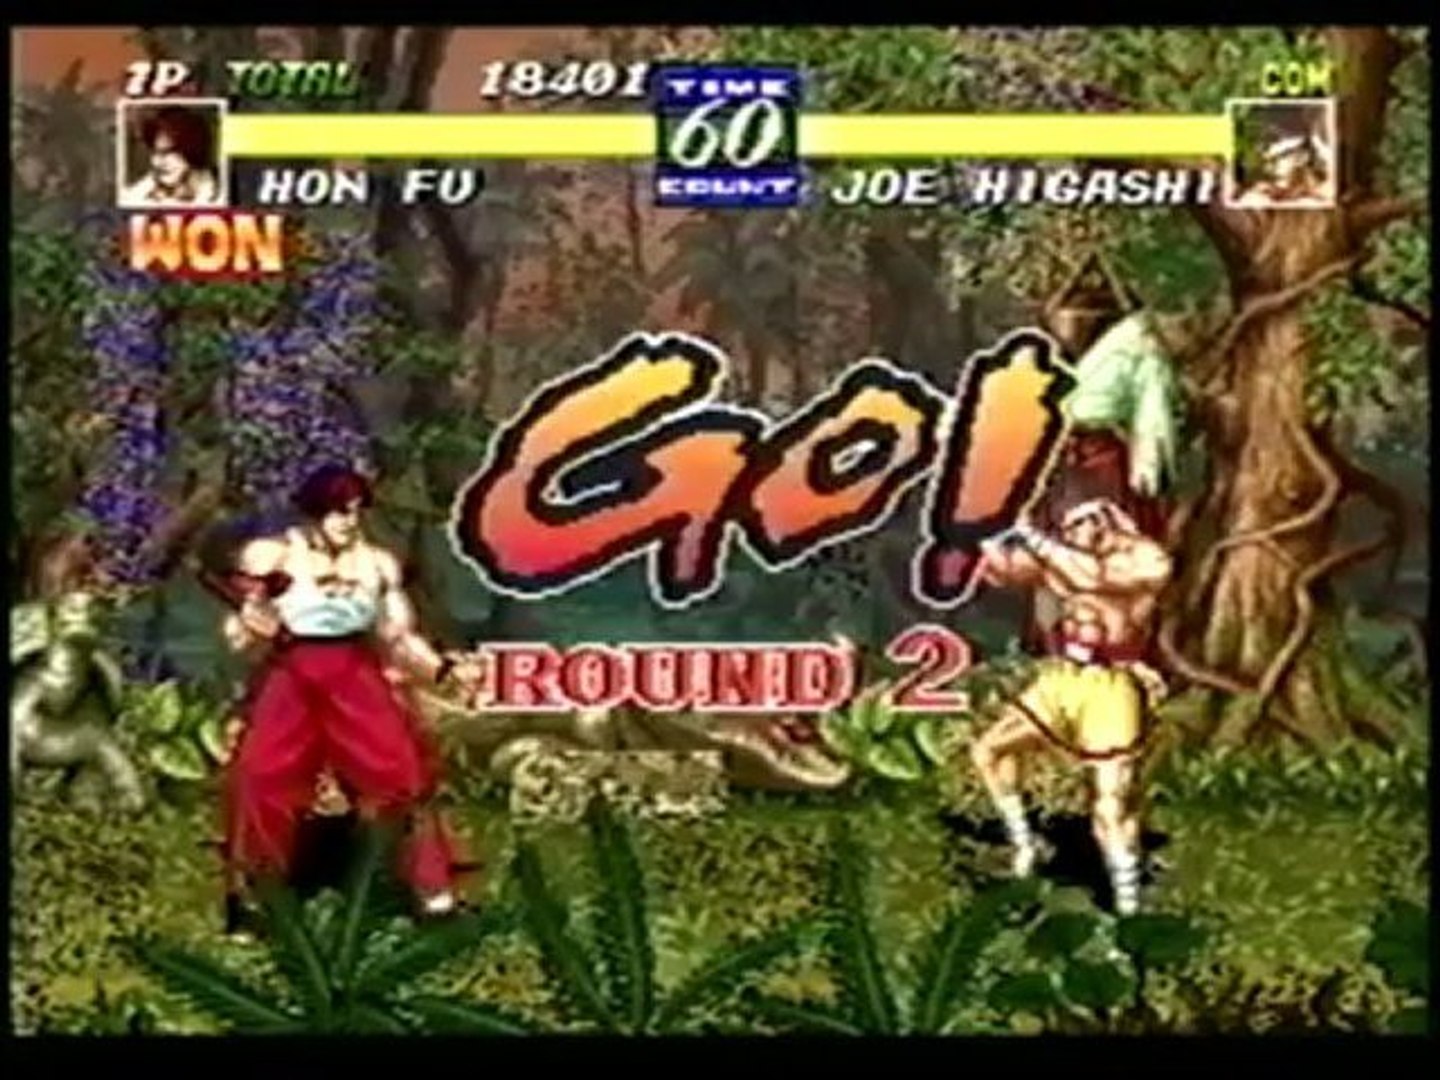 Fatal Fury 3: Road to the Final Victory Review (Neo Geo)